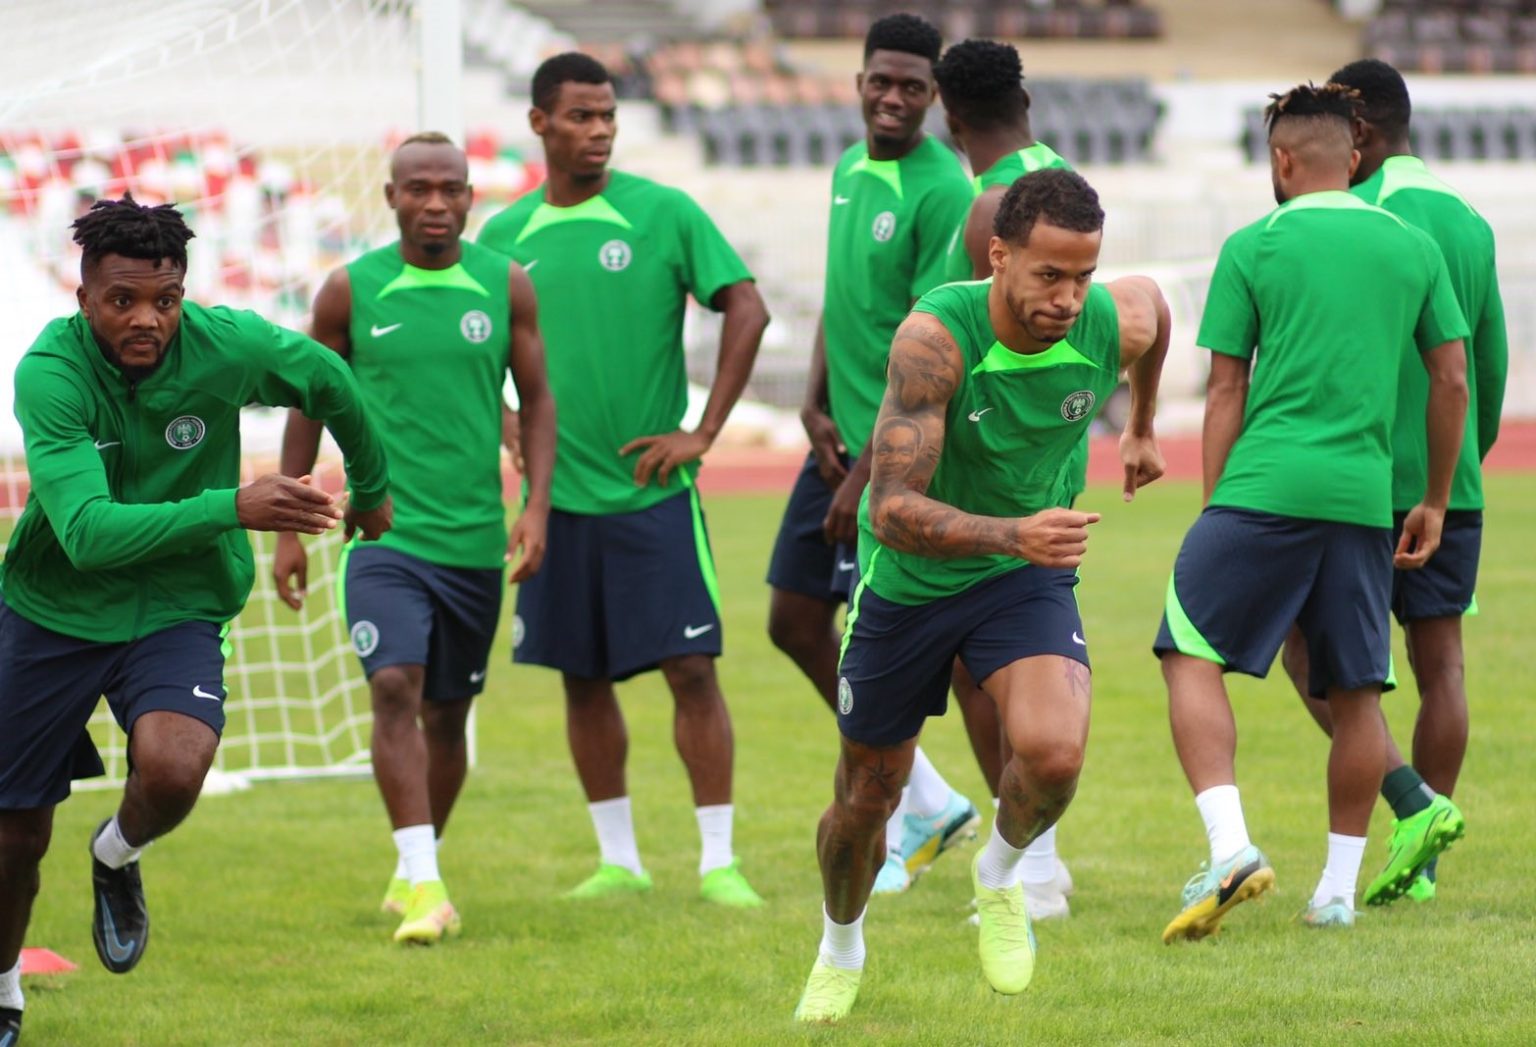 AFCON: We’ll Lift Trophy For Those Who Died Watching Us, Nigeria — Super Eagles